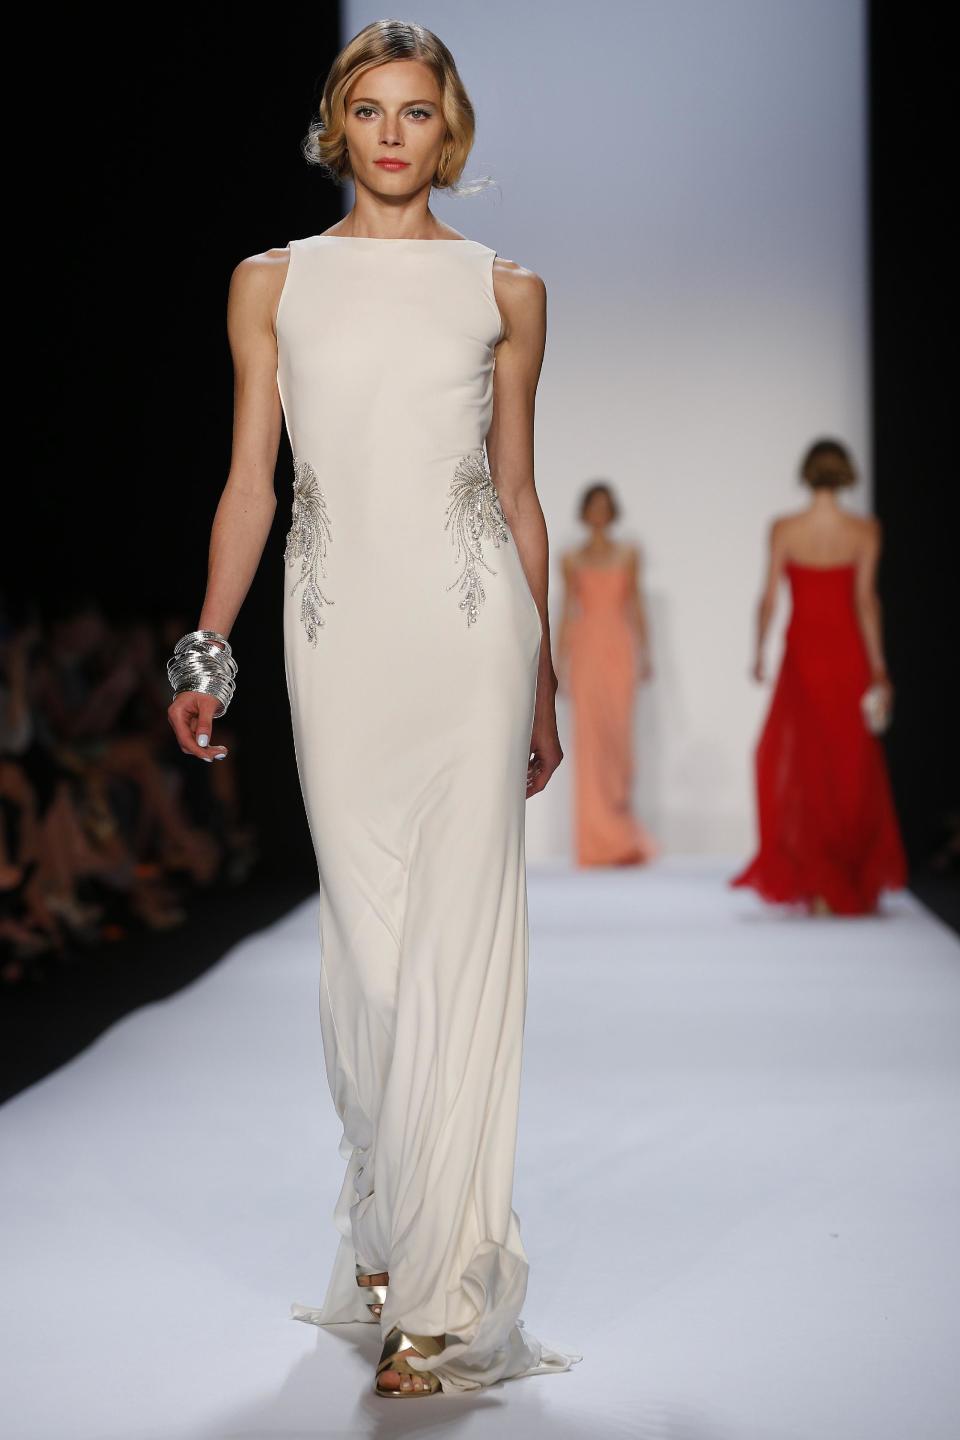 The Badgley Mischka Spring 2014 collection is modeled during Fashion Week in New York, Tuesday, Sept. 10, 2013. (AP Photo/John Minchillo)